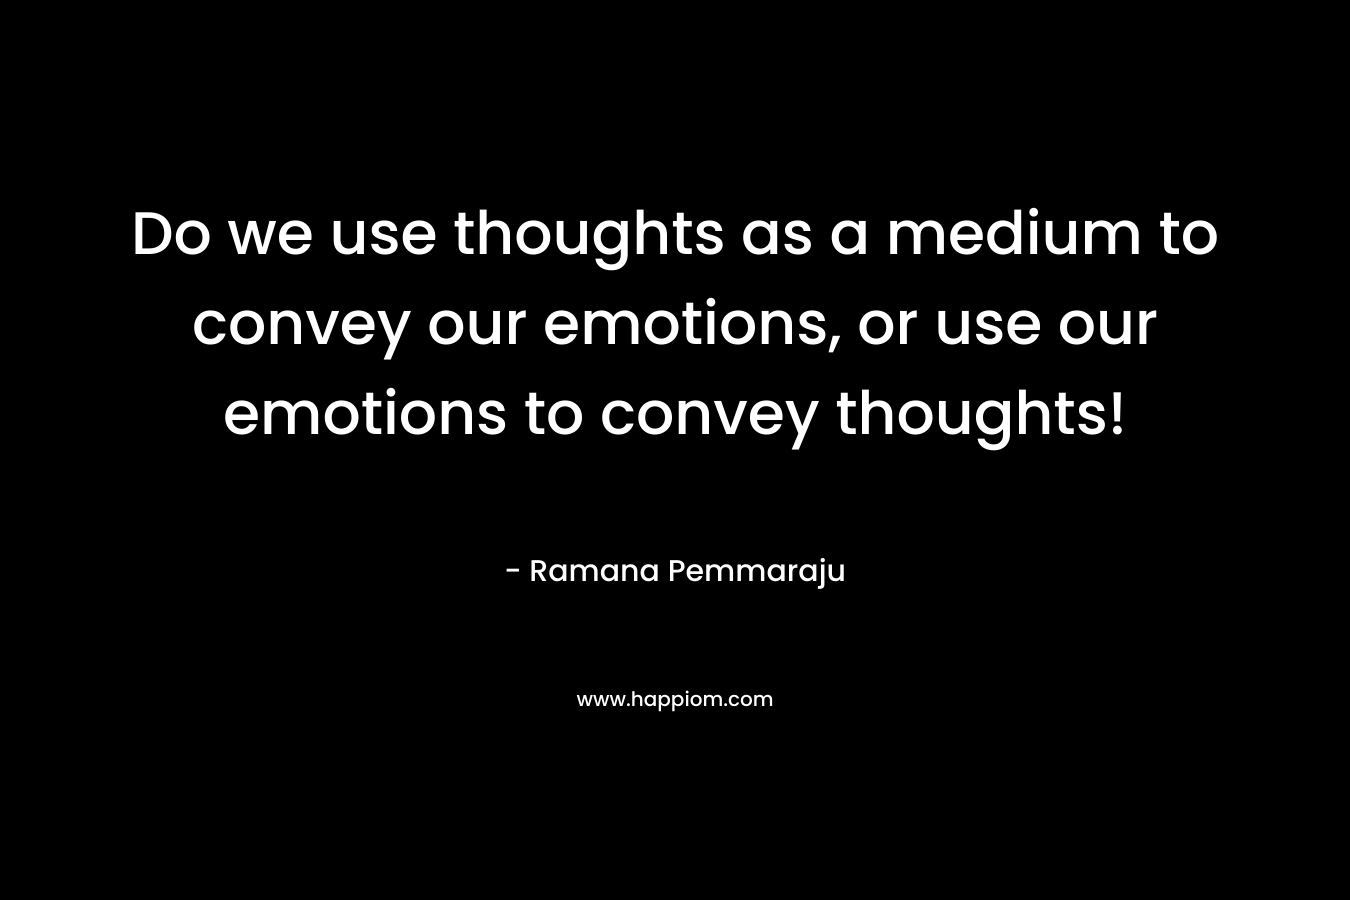 Do we use thoughts as a medium to convey our emotions, or use our emotions to convey thoughts! – Ramana Pemmaraju